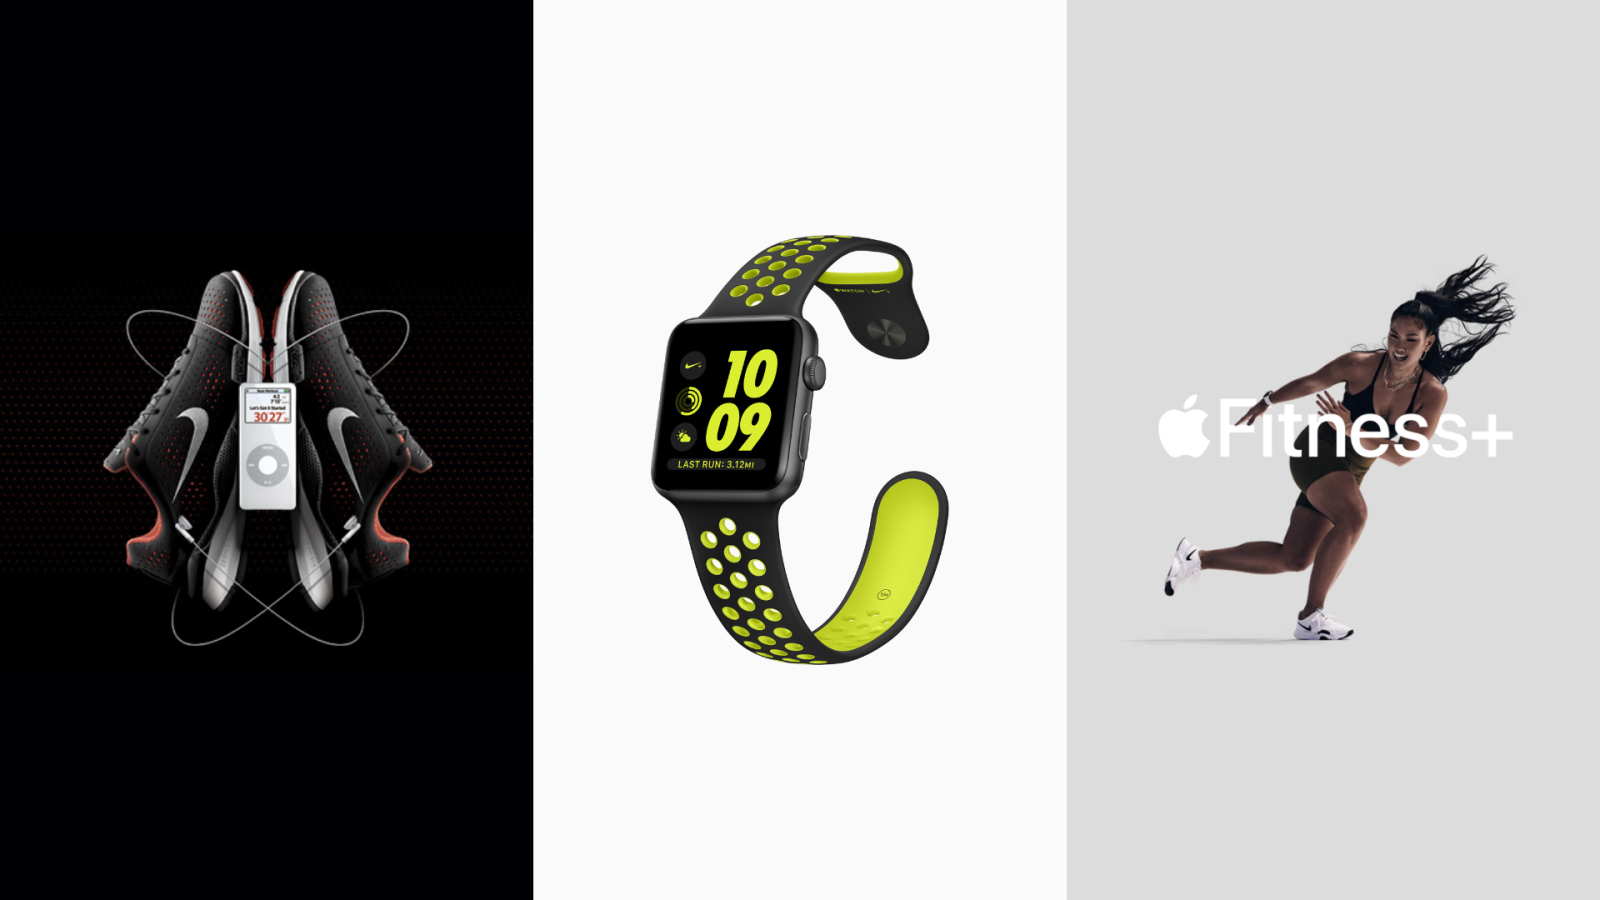 Opinion: Apple should poach Peloton’s talent for Fitness+ without the bike business baggage